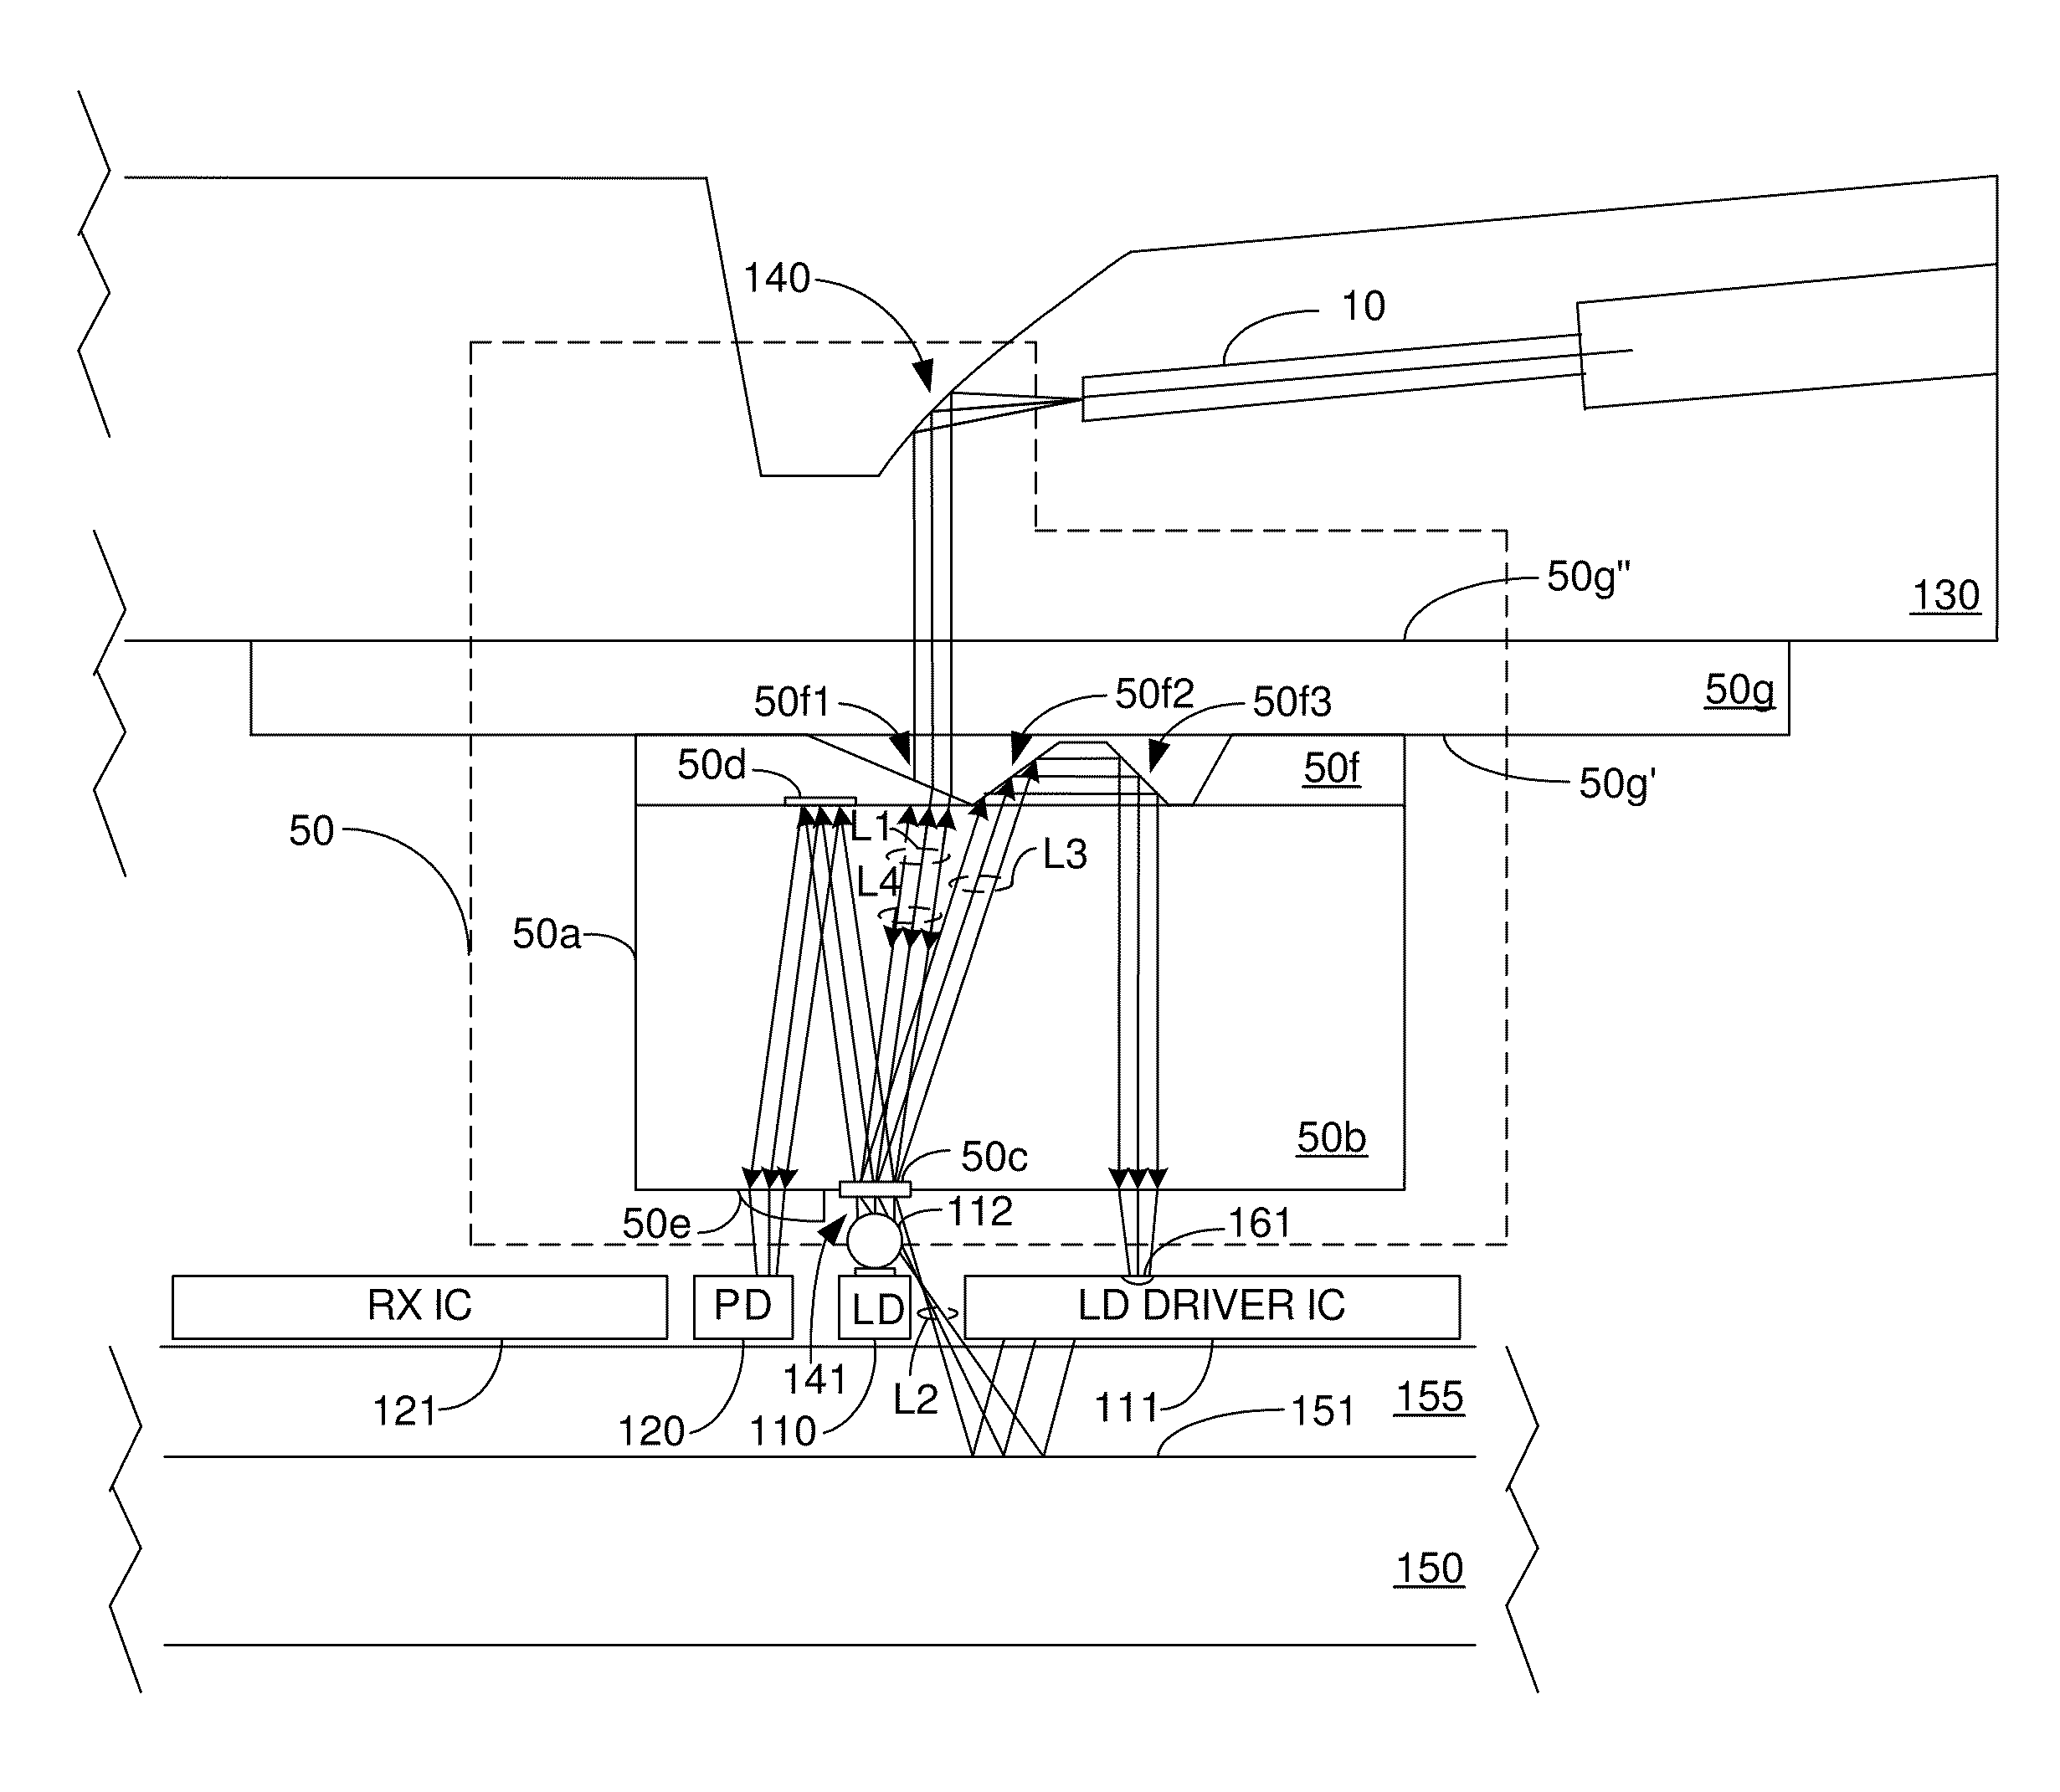 Optical beam splitter for use in an optoelectronic module, and a method for performing optical beam splitting in an optoelectronic module